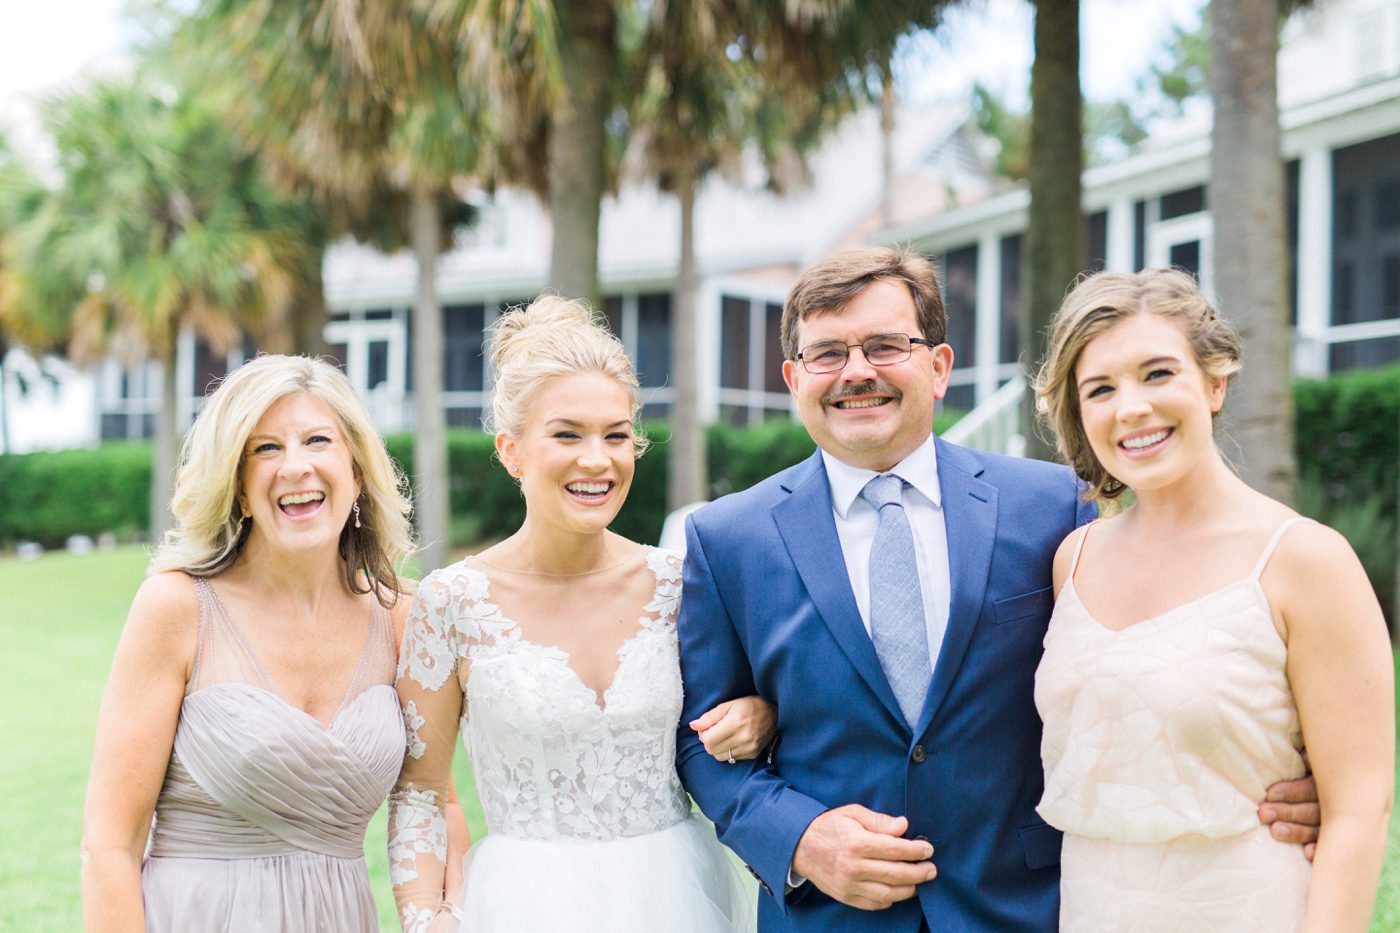 Candid family photo of the bride and her parents laughing together. Photo by Catherine Ann Photography